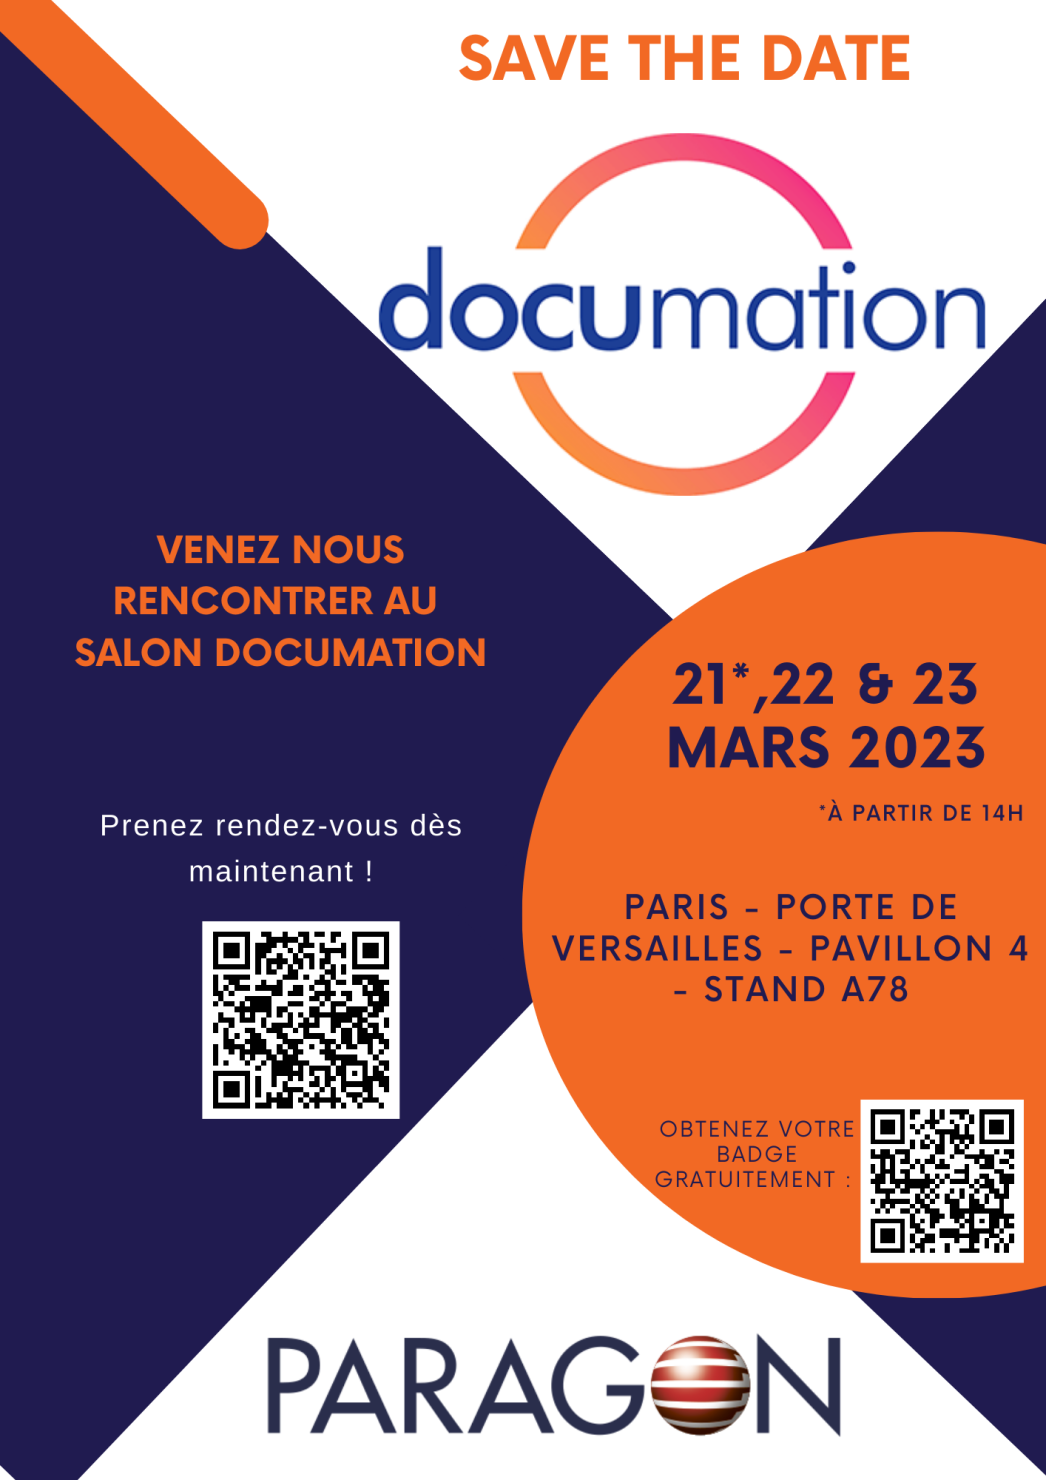 save_the_date_documation